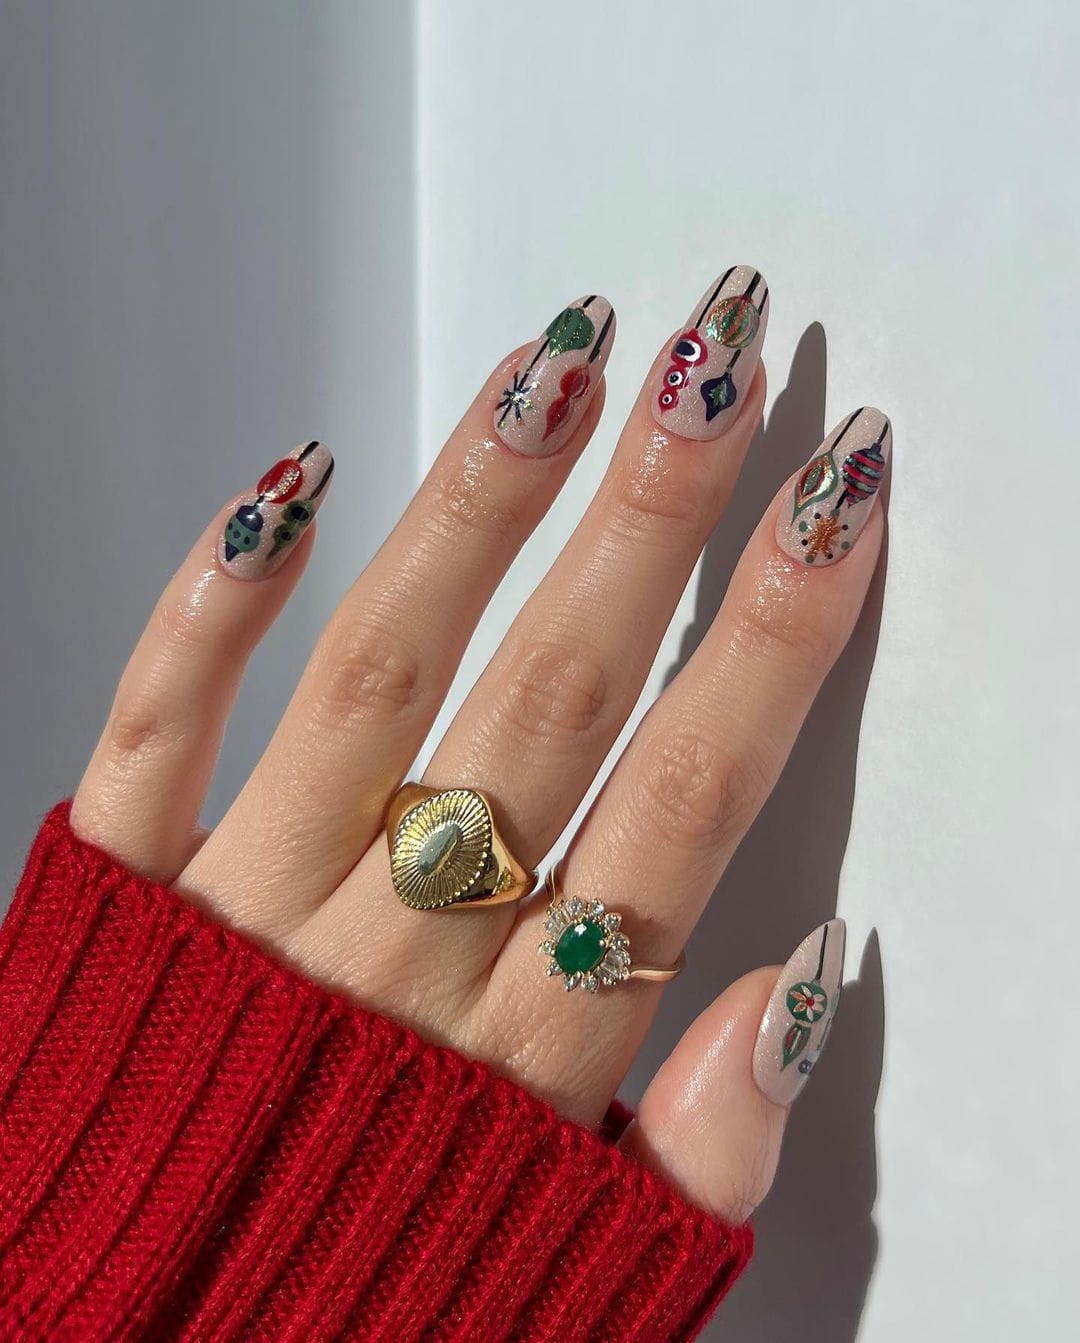 50+ Cute Short Nail Designs You’ll Want To Try Today images 22